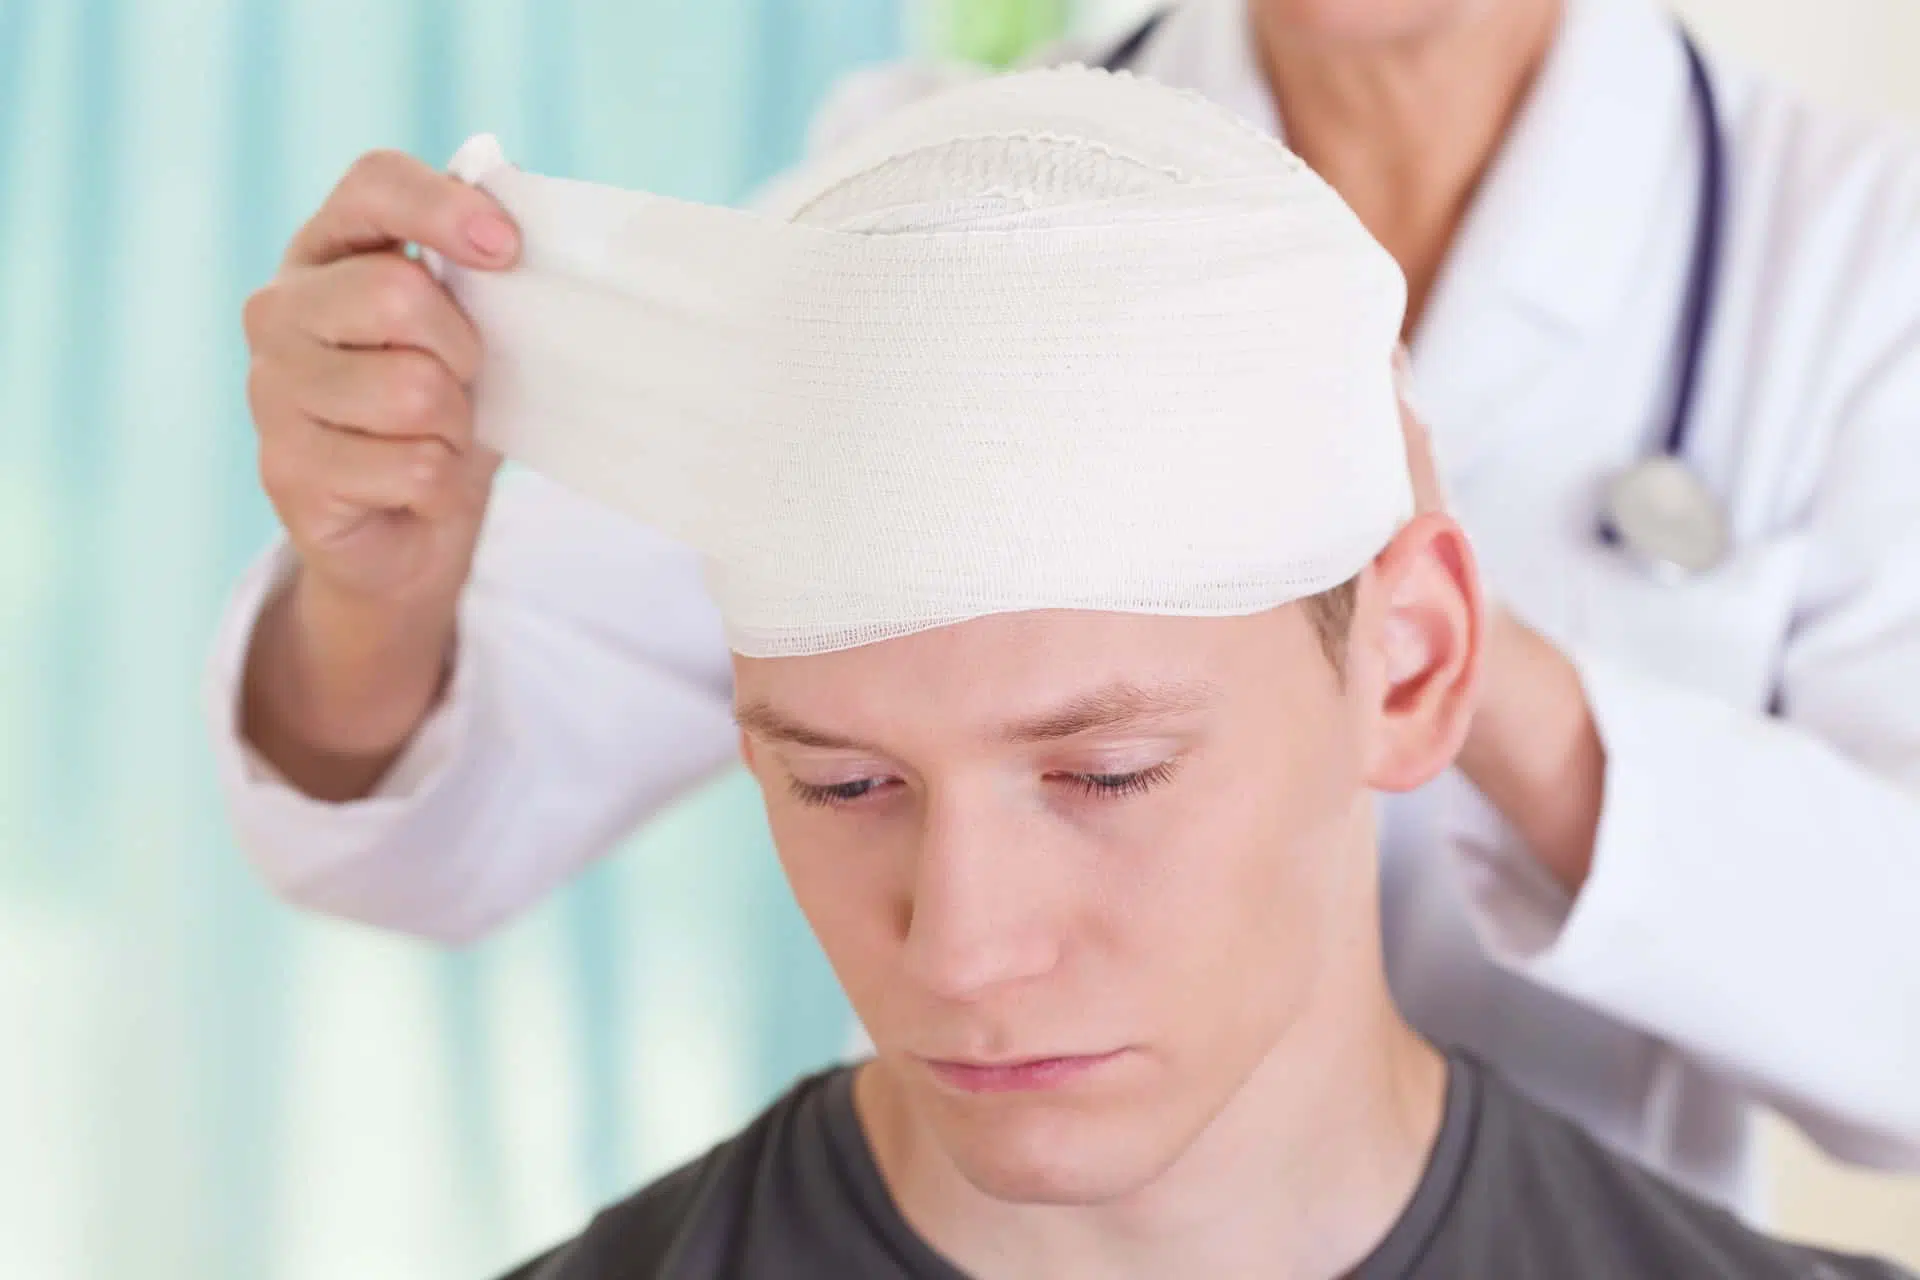 Young man getting head wrapped after a tragic personal injury